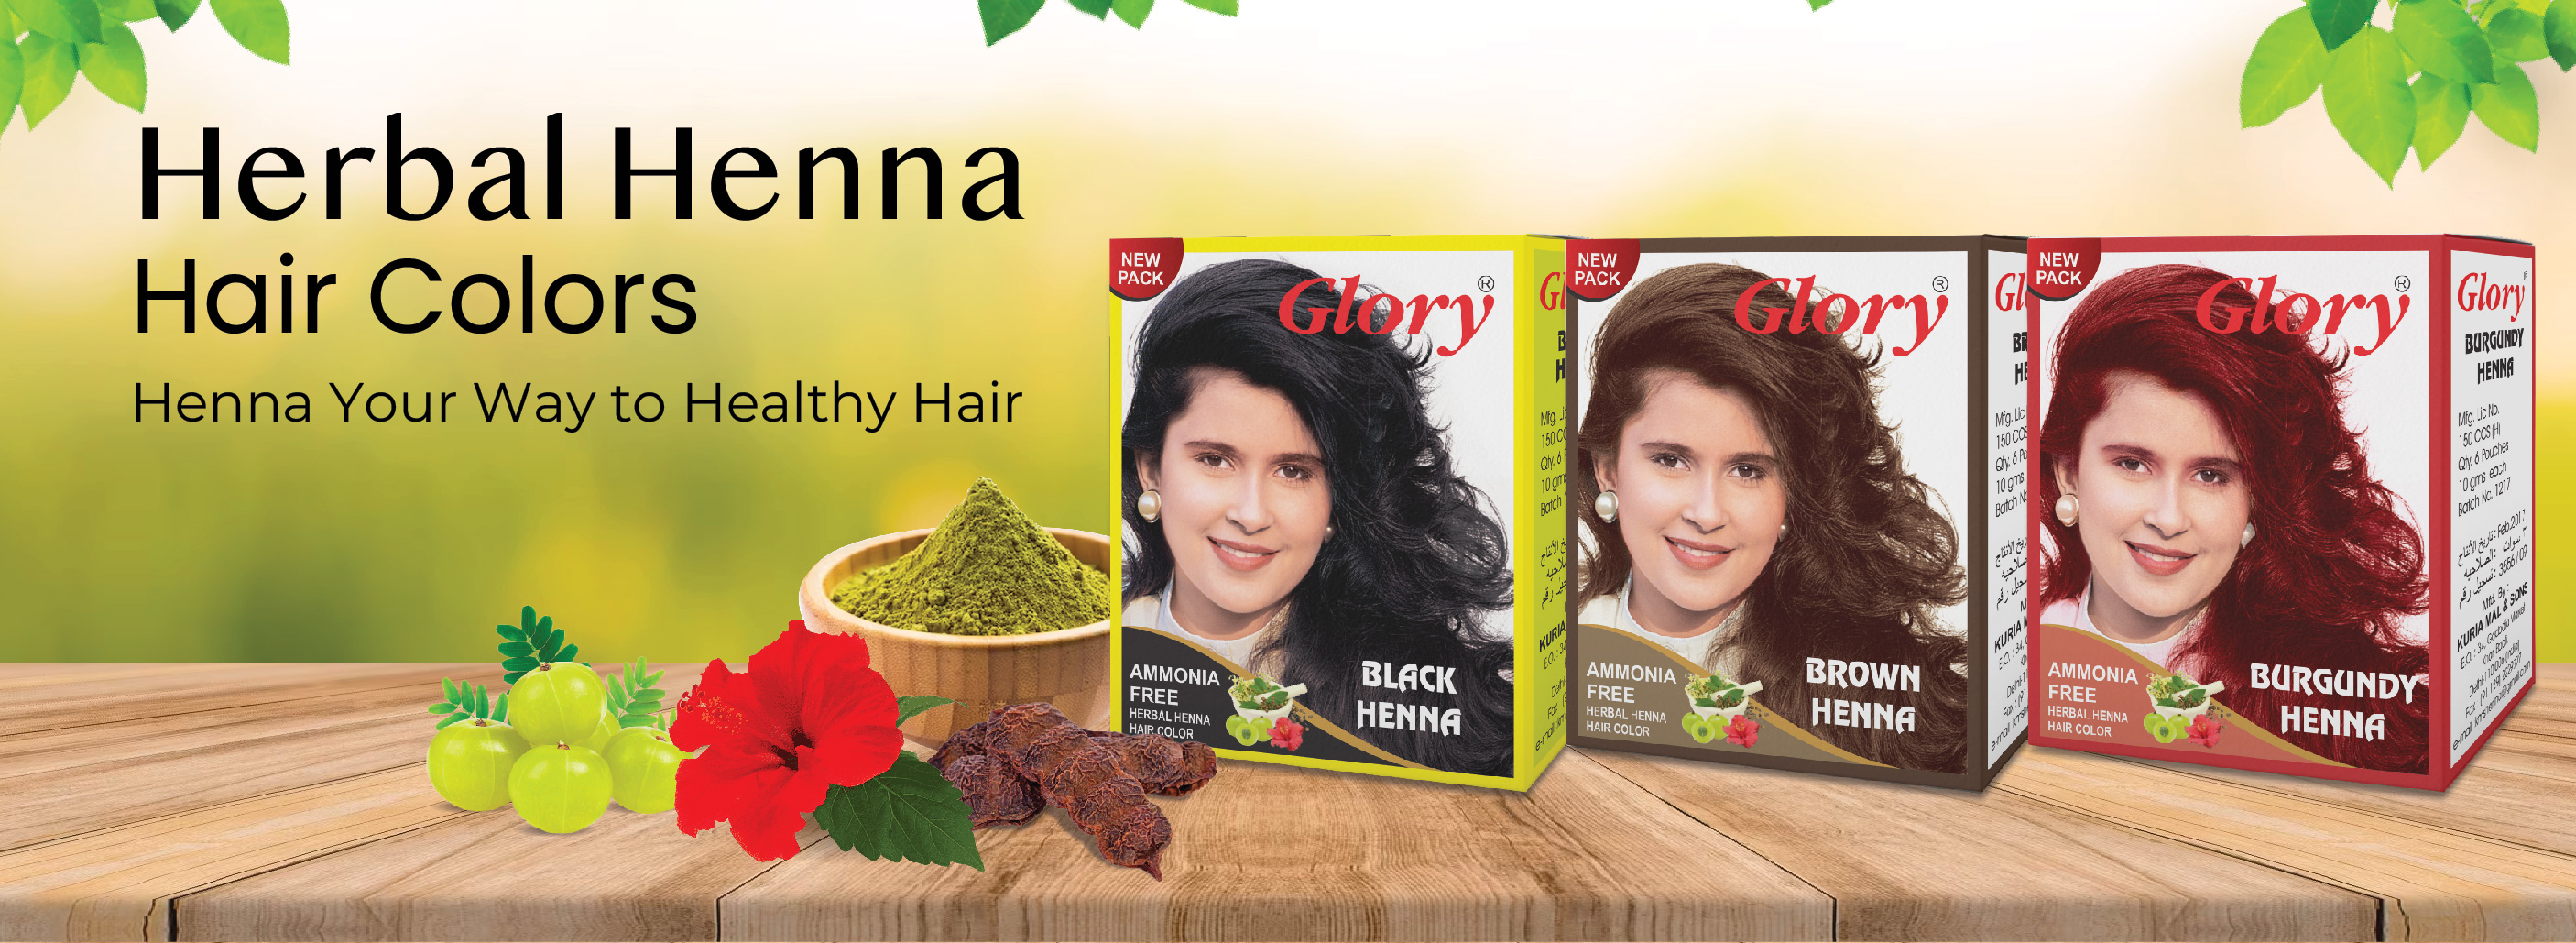 Henna Hair Color Manufacturer | Henna Hair Color Manufacturer in South Africa